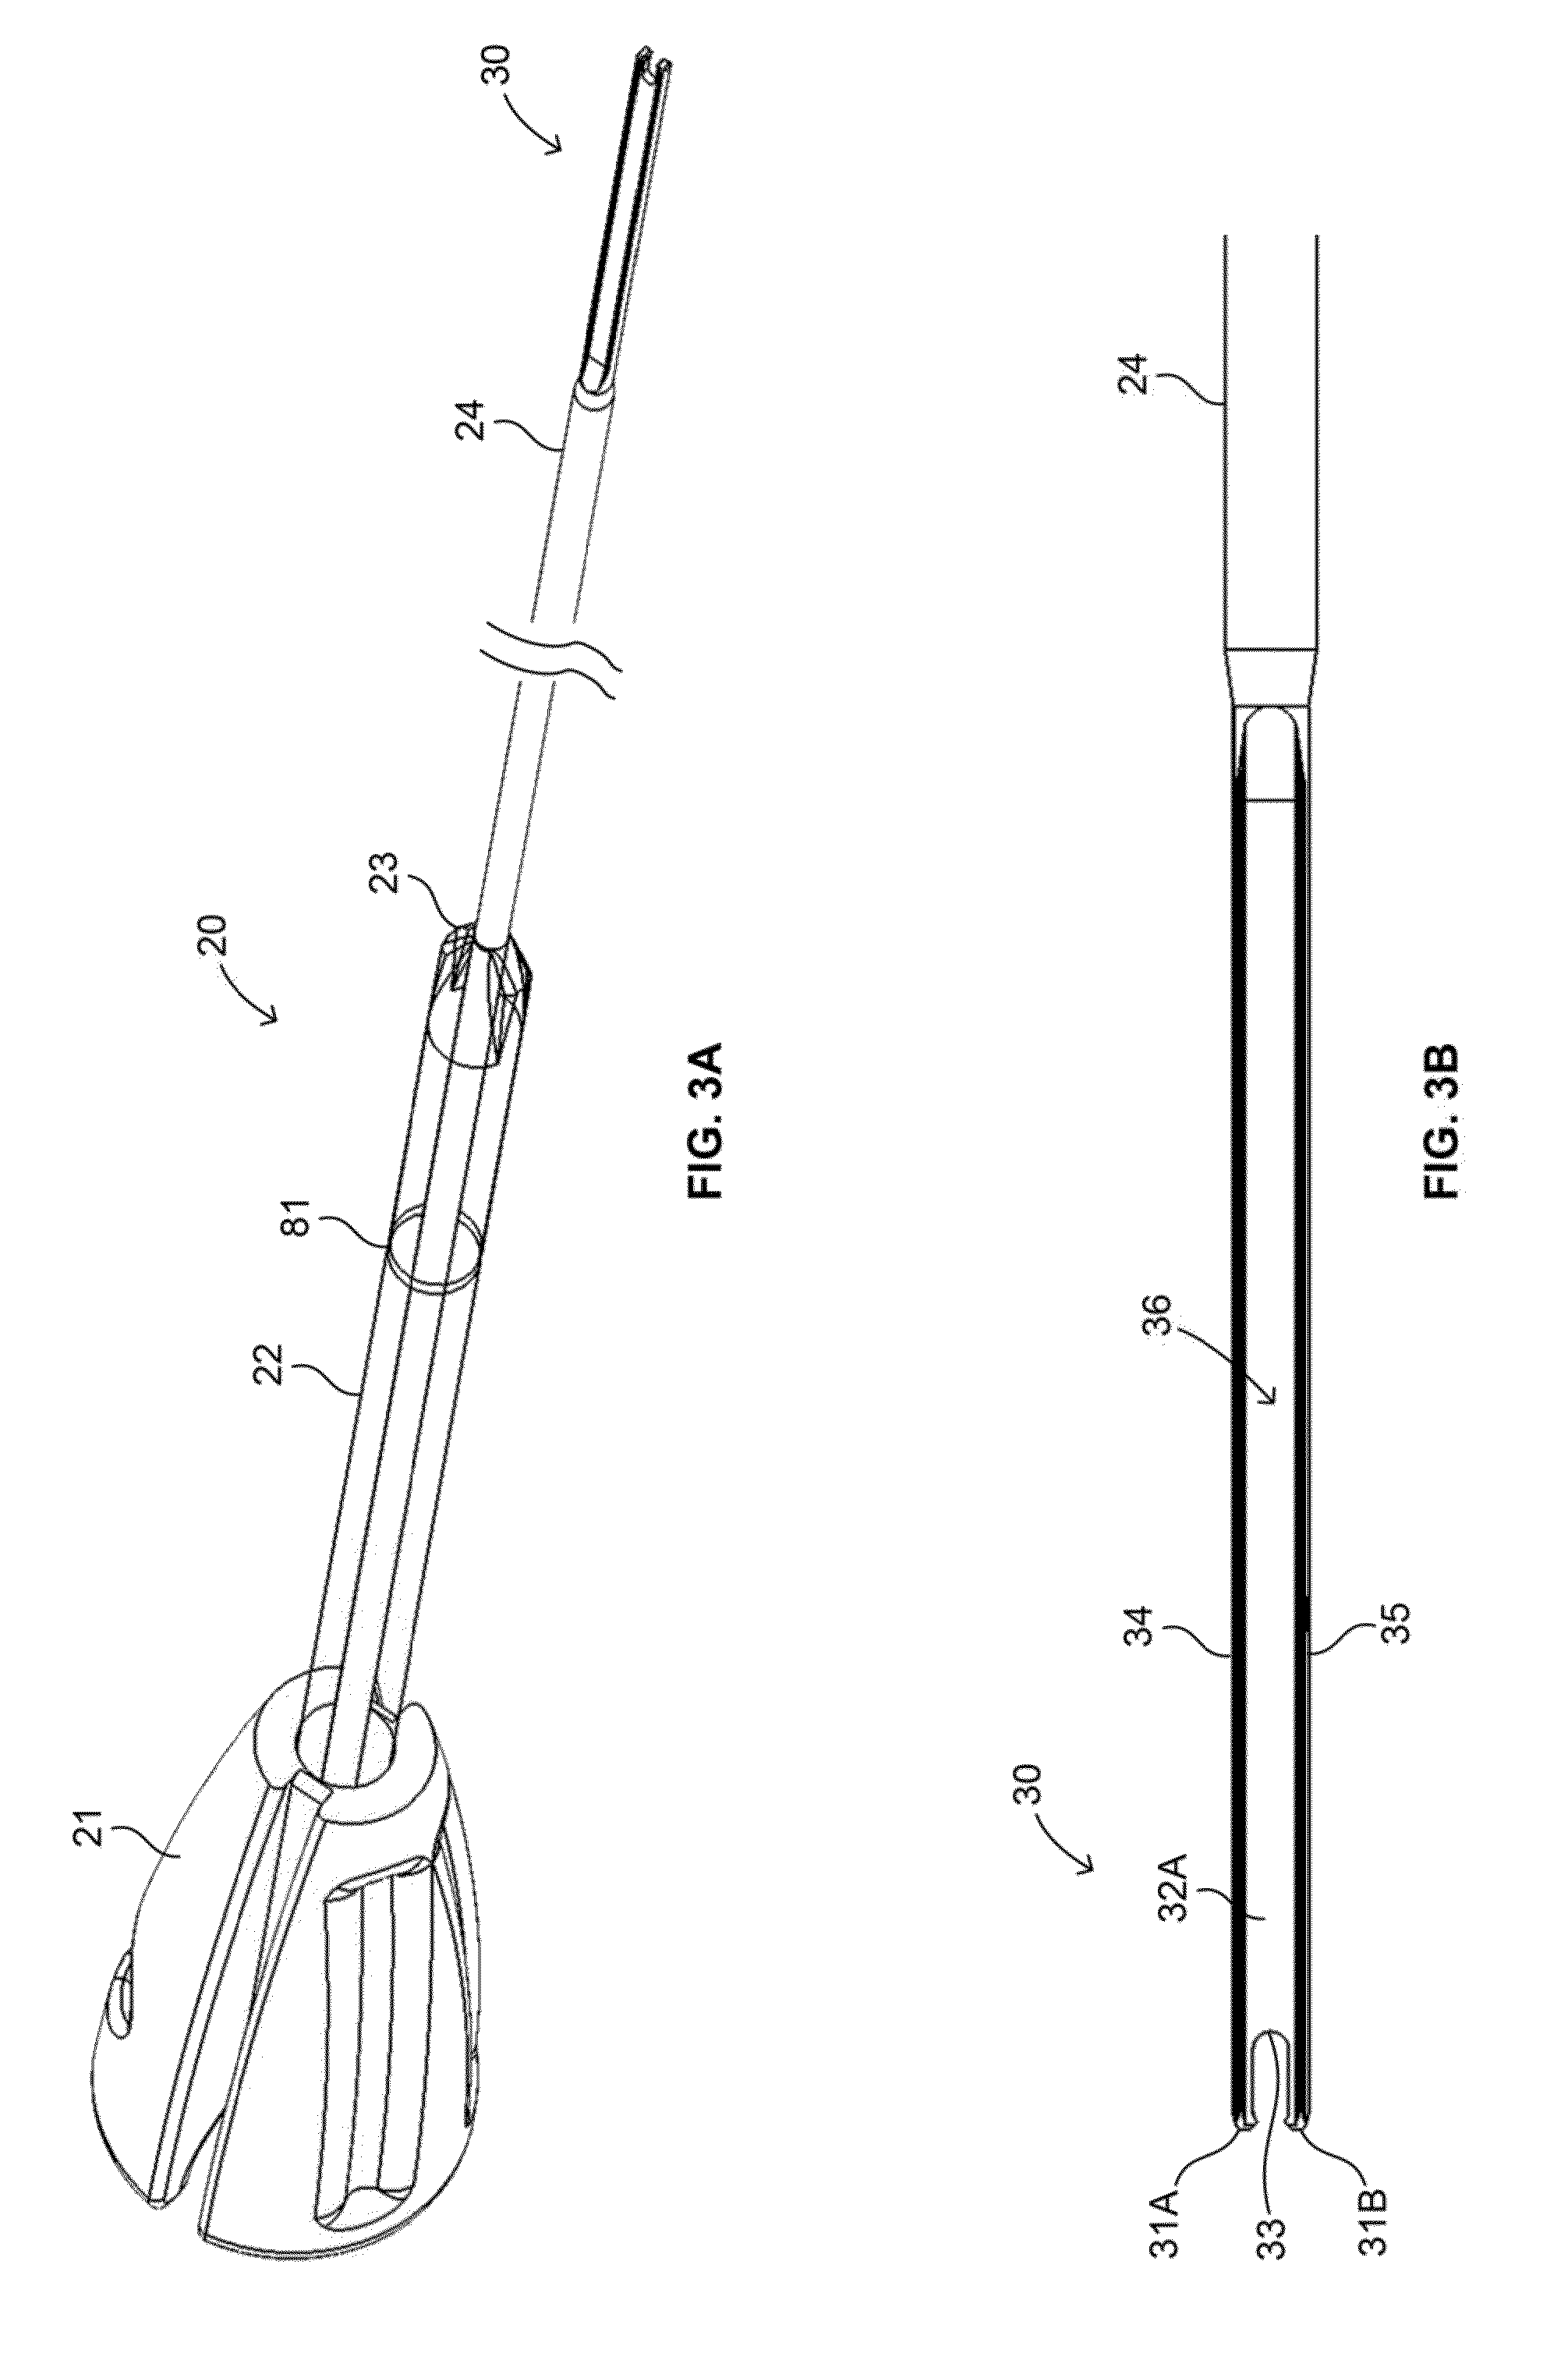 Surgical instruments and methods of use